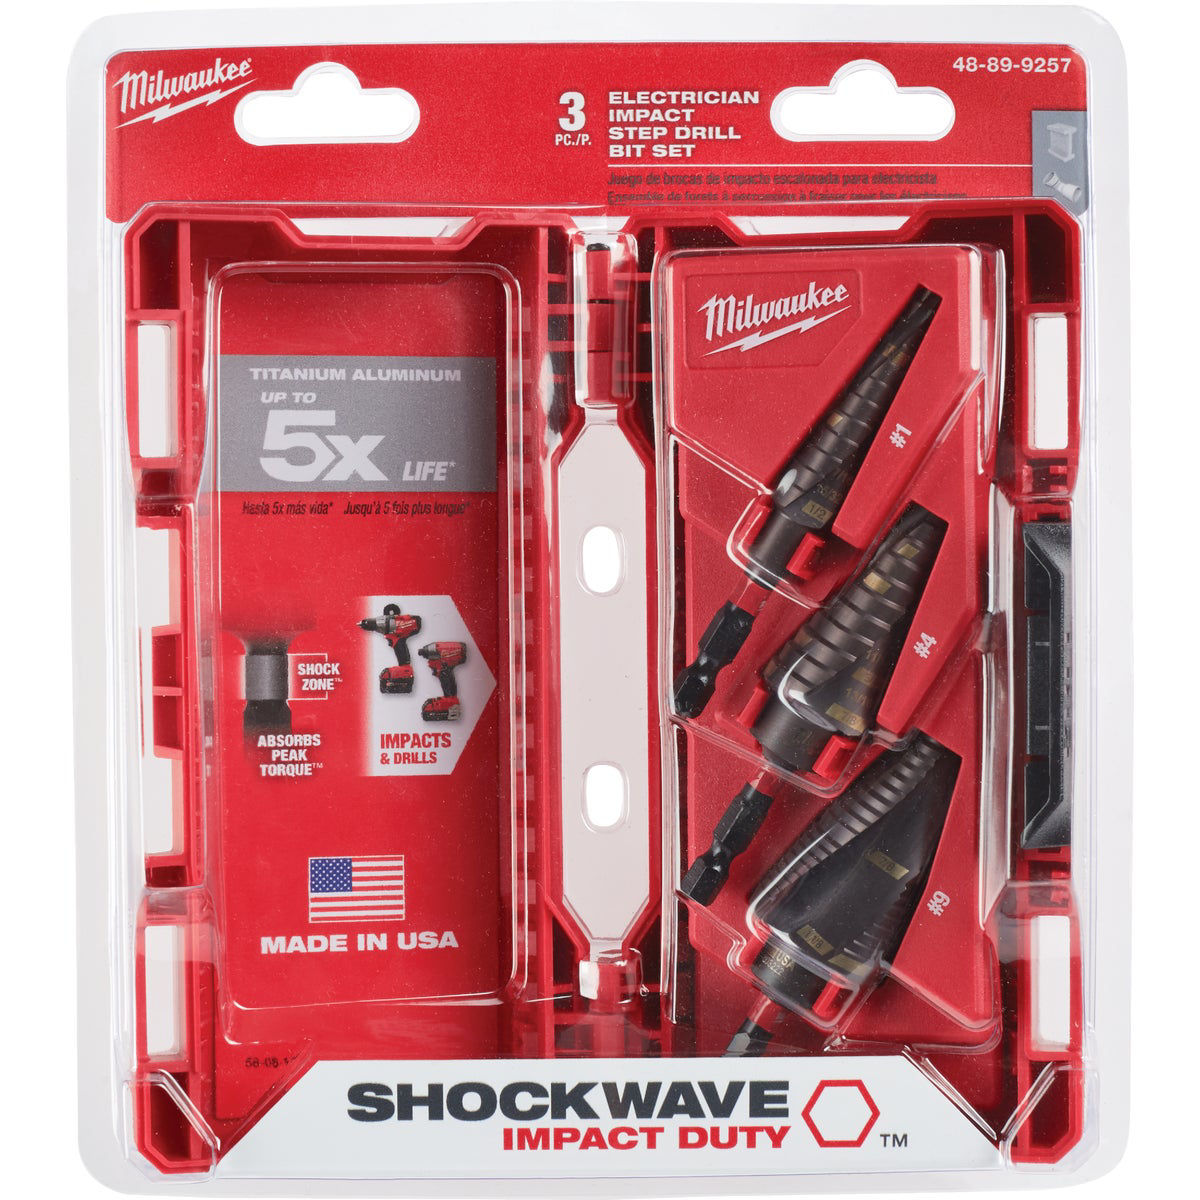 Milwaukee SHOCKWAVE Impact Drill & Driver Bits - Brands at Ohio